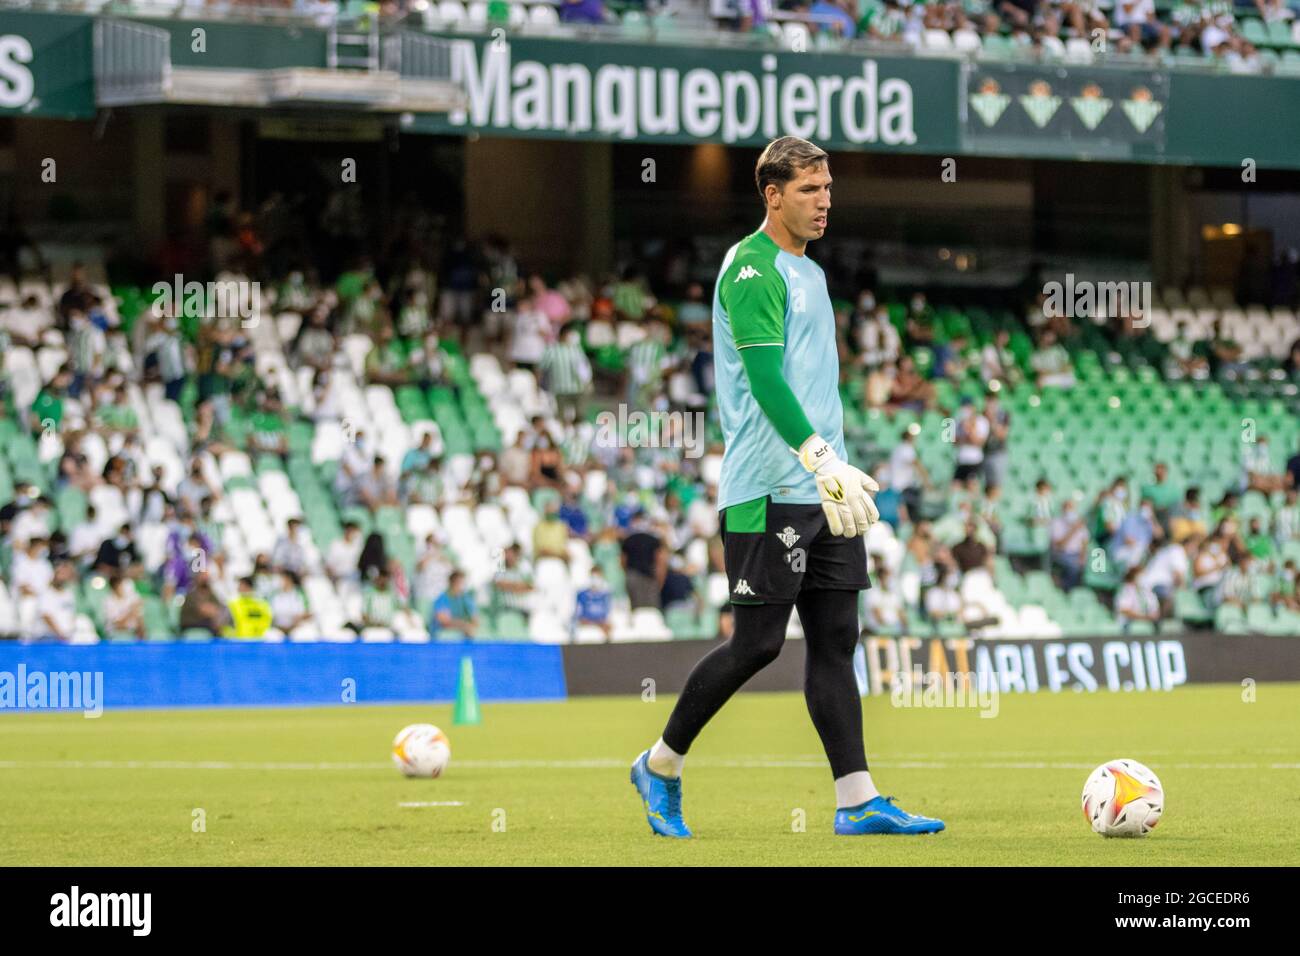 SEVILLE, SPAIN - 07 AUGUST 2021: Joel Robles of Real Betis Balompi during the friendly match between Real Betis Balompi and AS Roma. Credits: Mario D’az Rasero / Medialys Images/Sipa USA Stock Photo